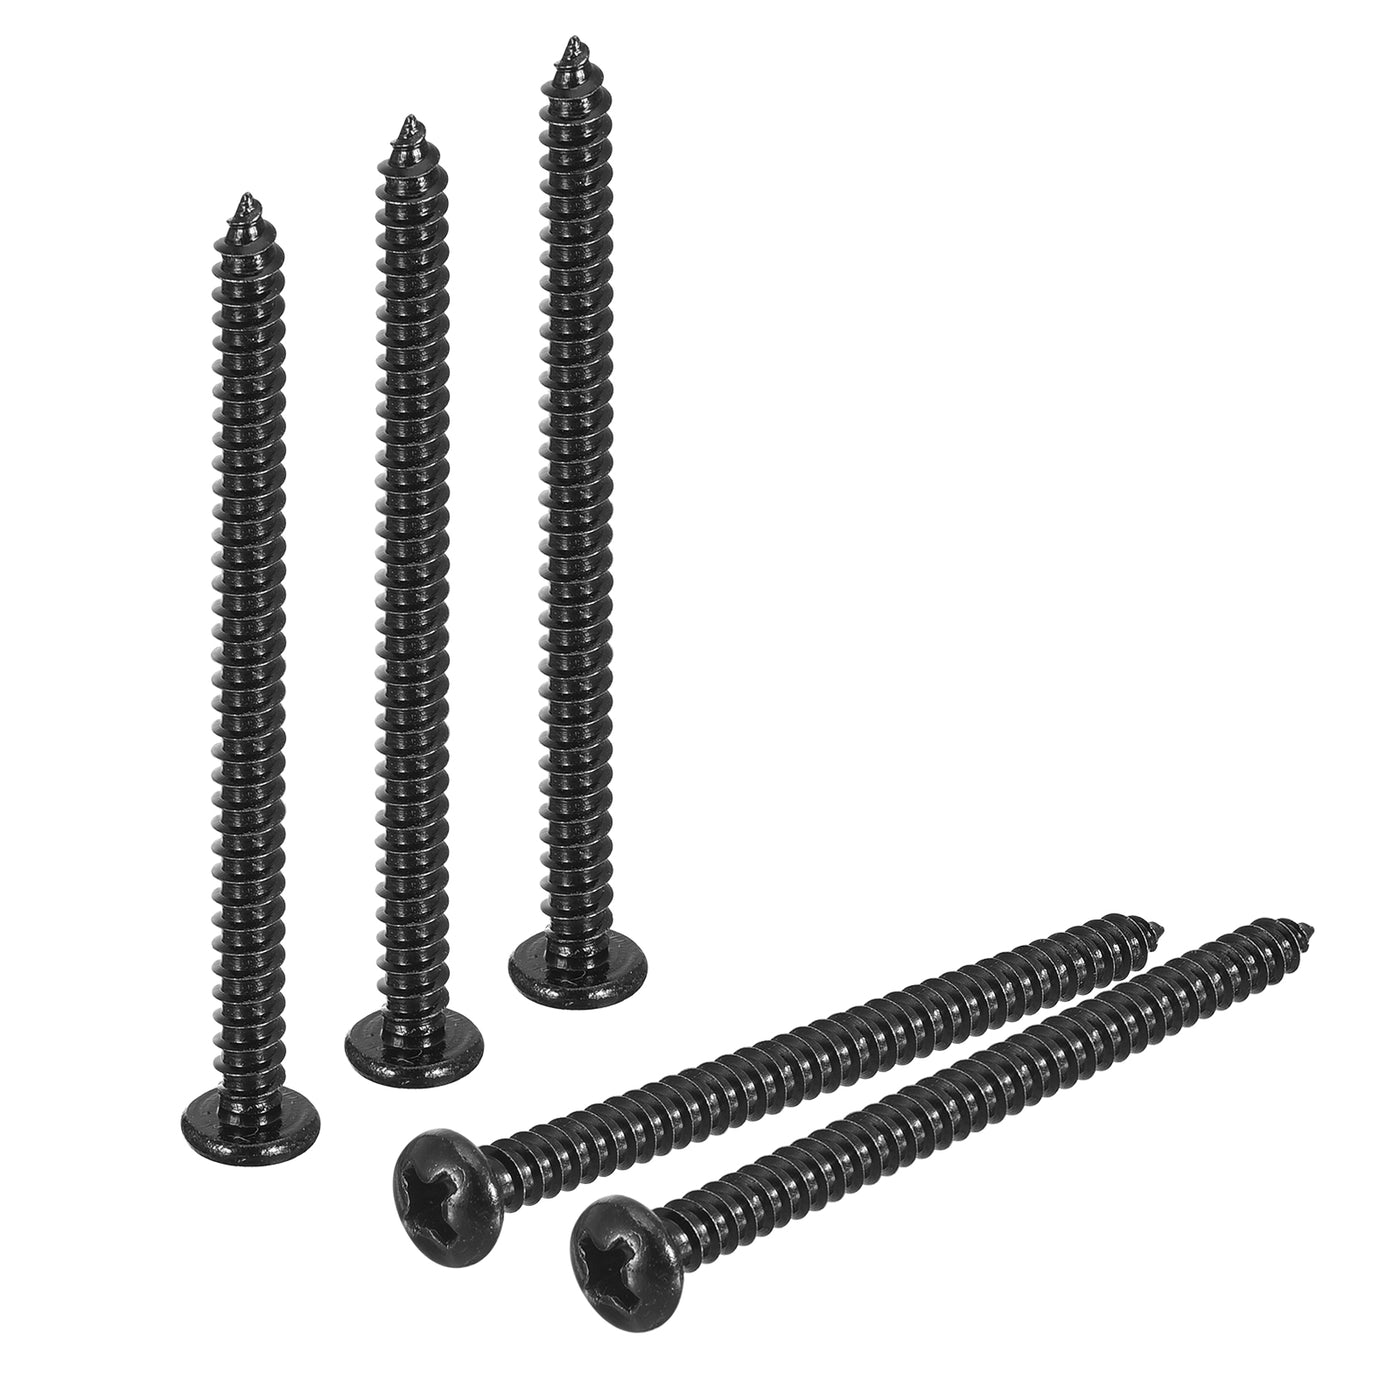 uxcell Uxcell #6 x 2" Phillips Pan Head Self-tapping Screw, 100pcs - 304 Stainless Steel Round Head Wood Screw Full Thread (Black)